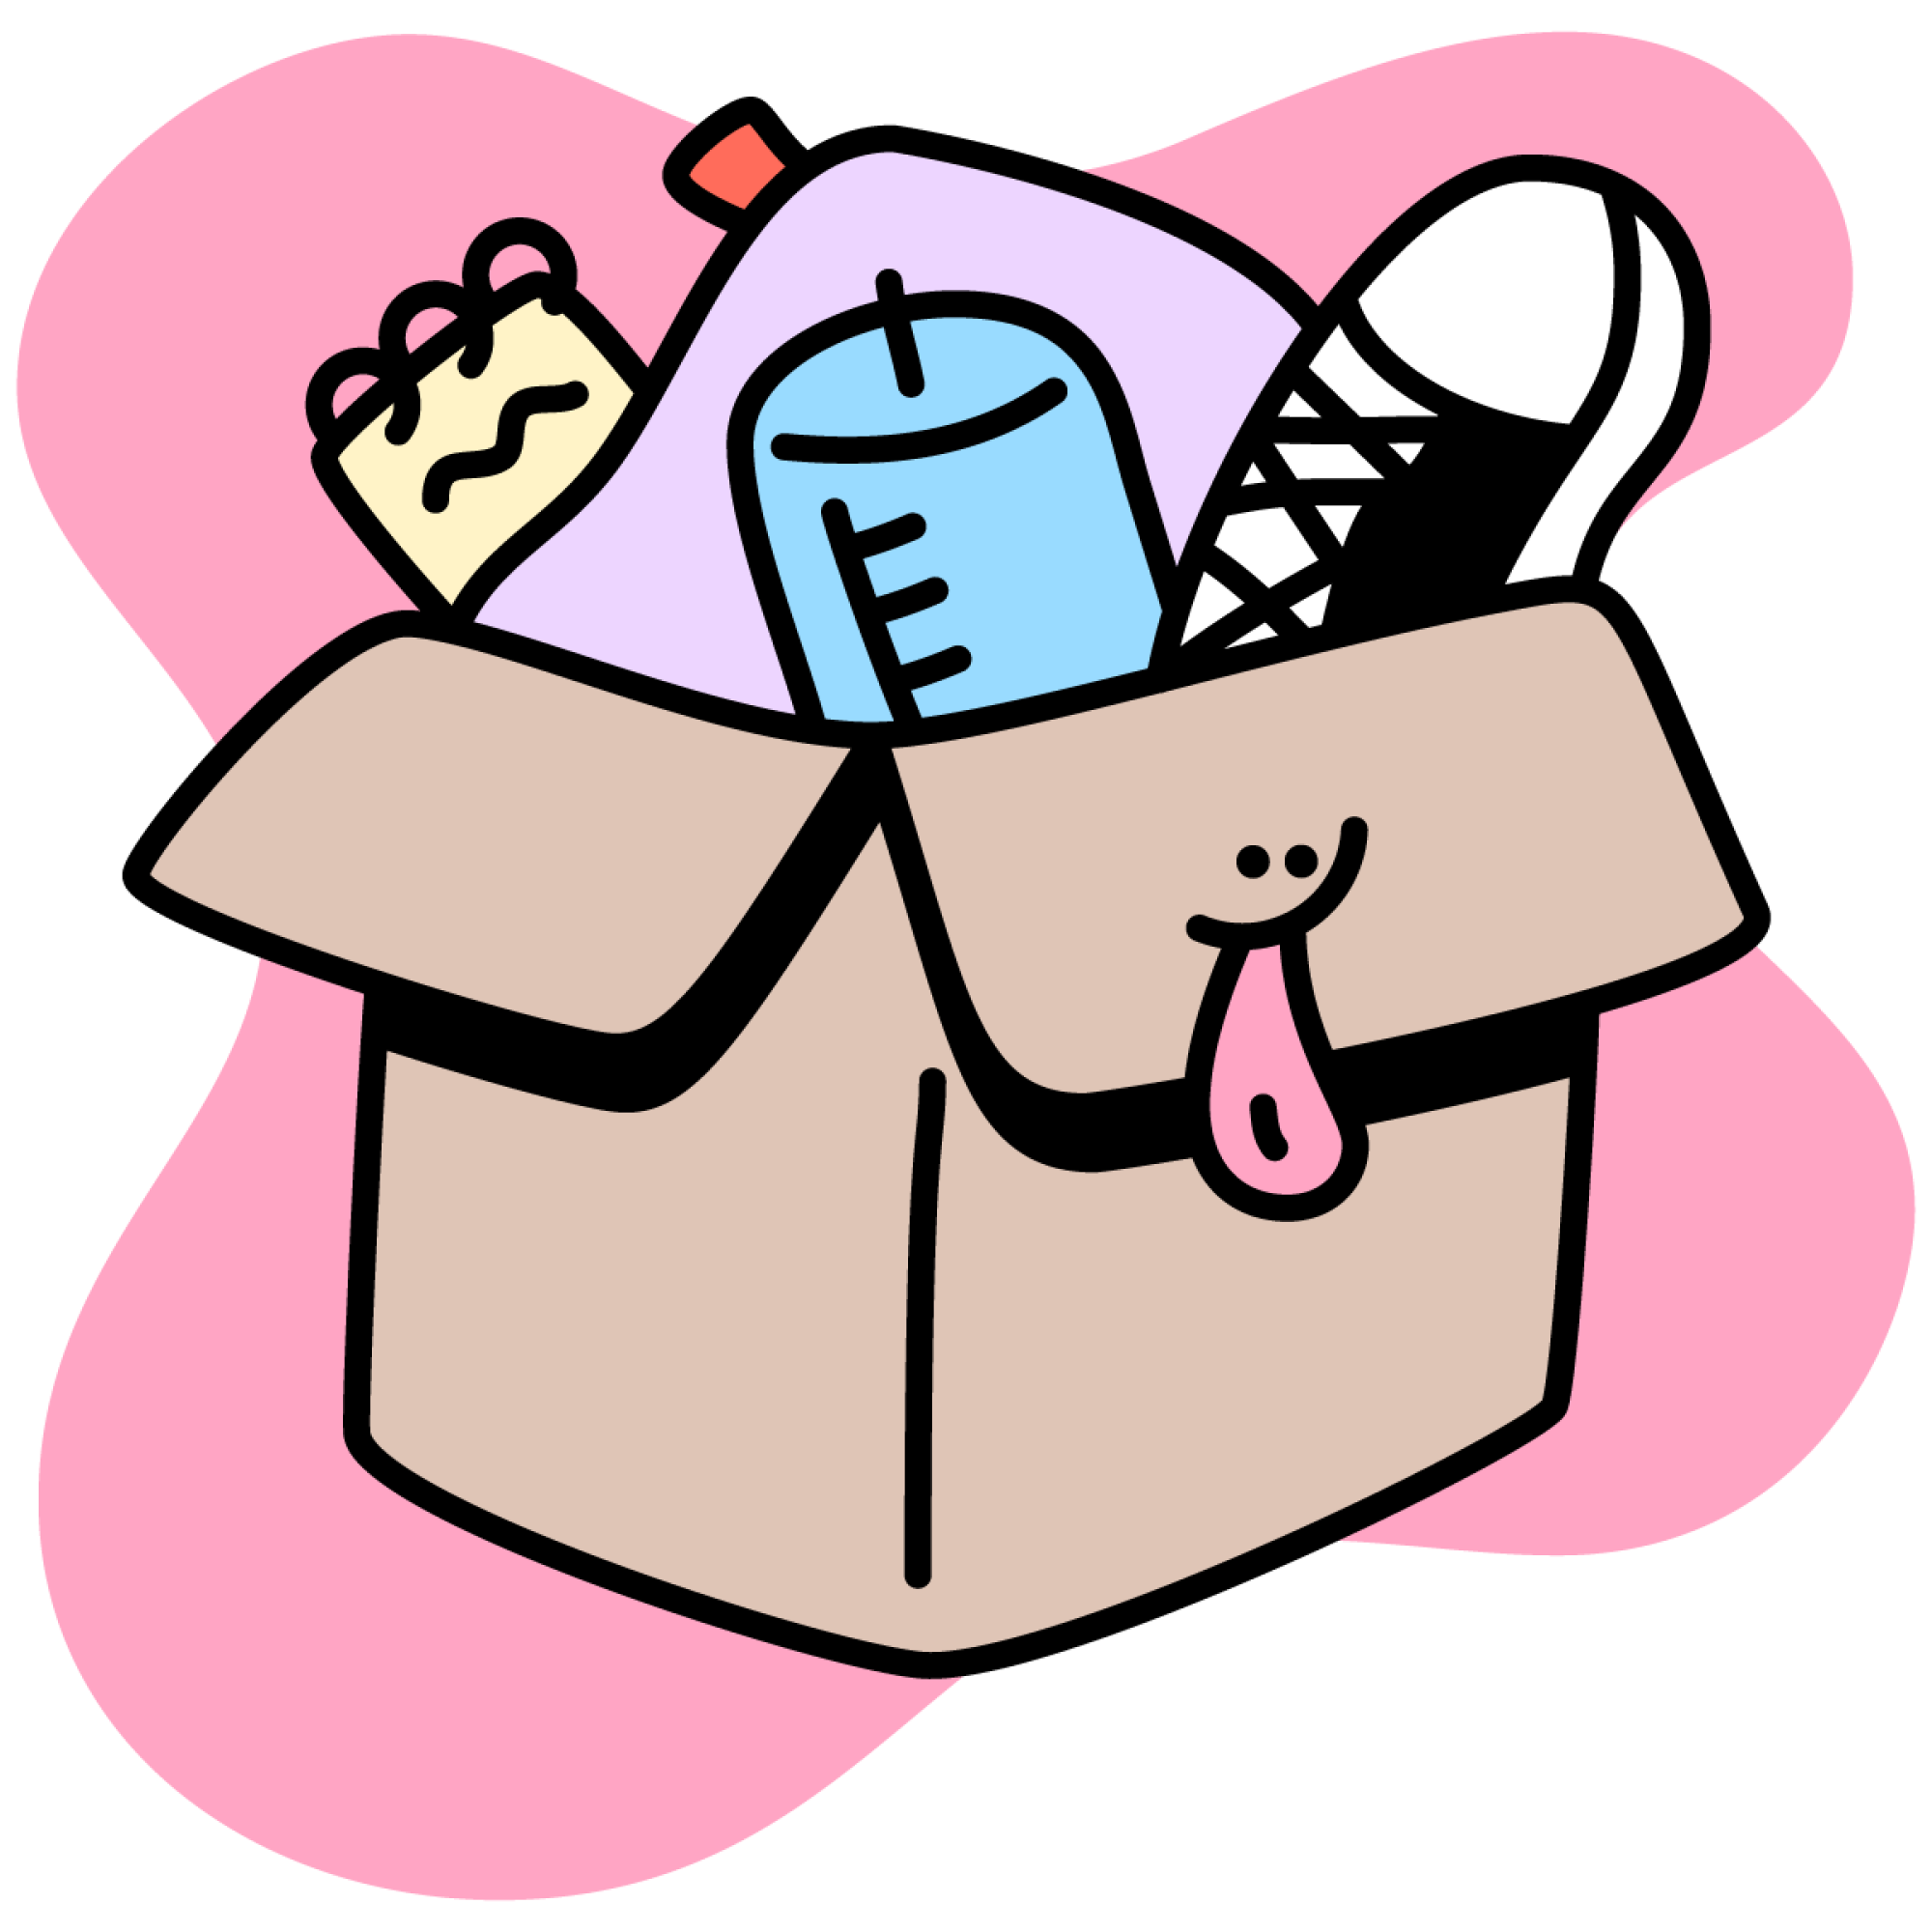 Illustration of a box of clothes and household items